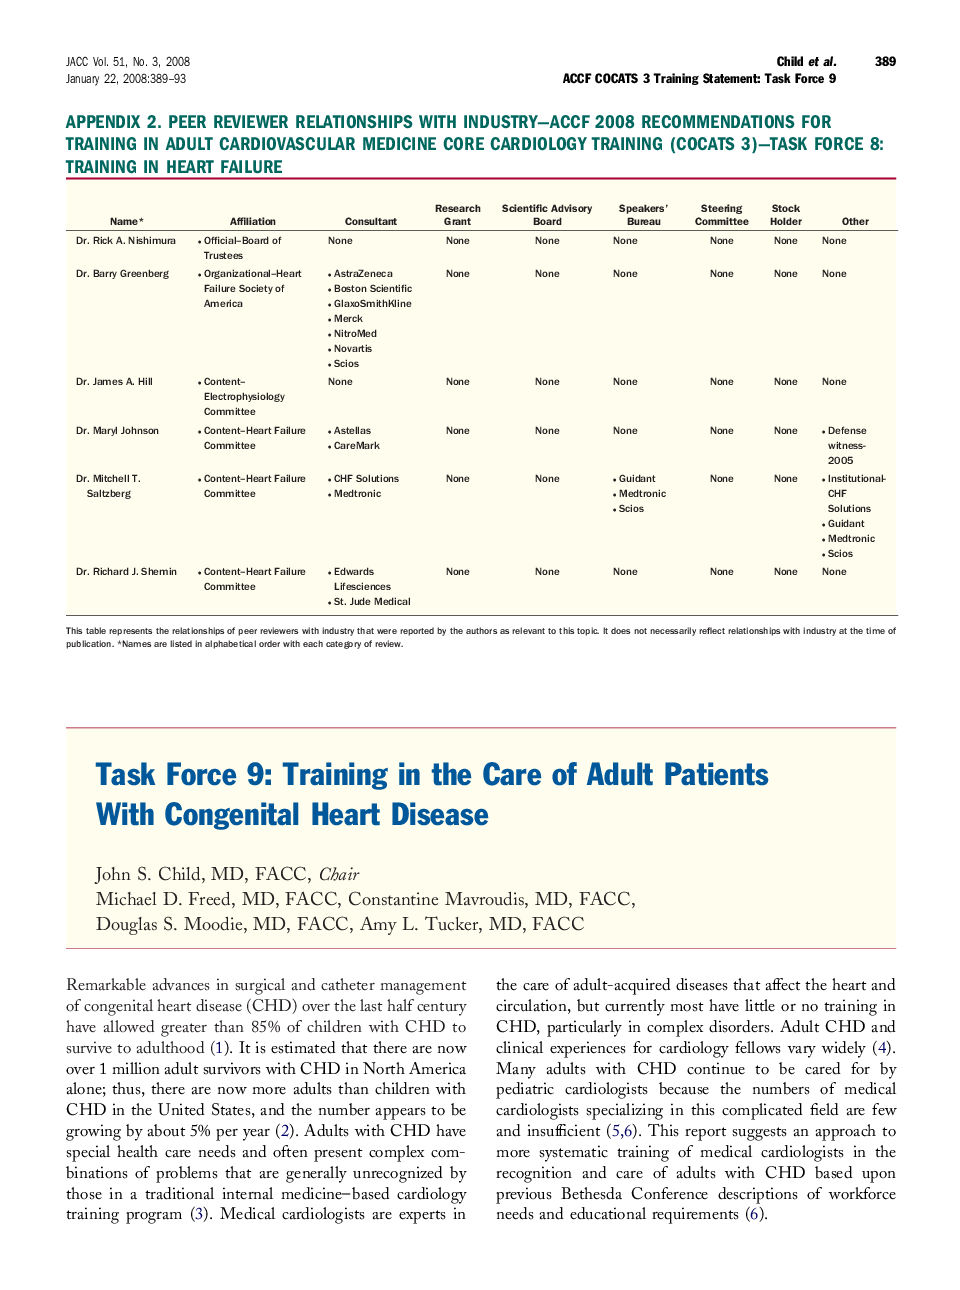 Task Force 9: Training in the Care of Adult Patients With Congenital Heart Disease